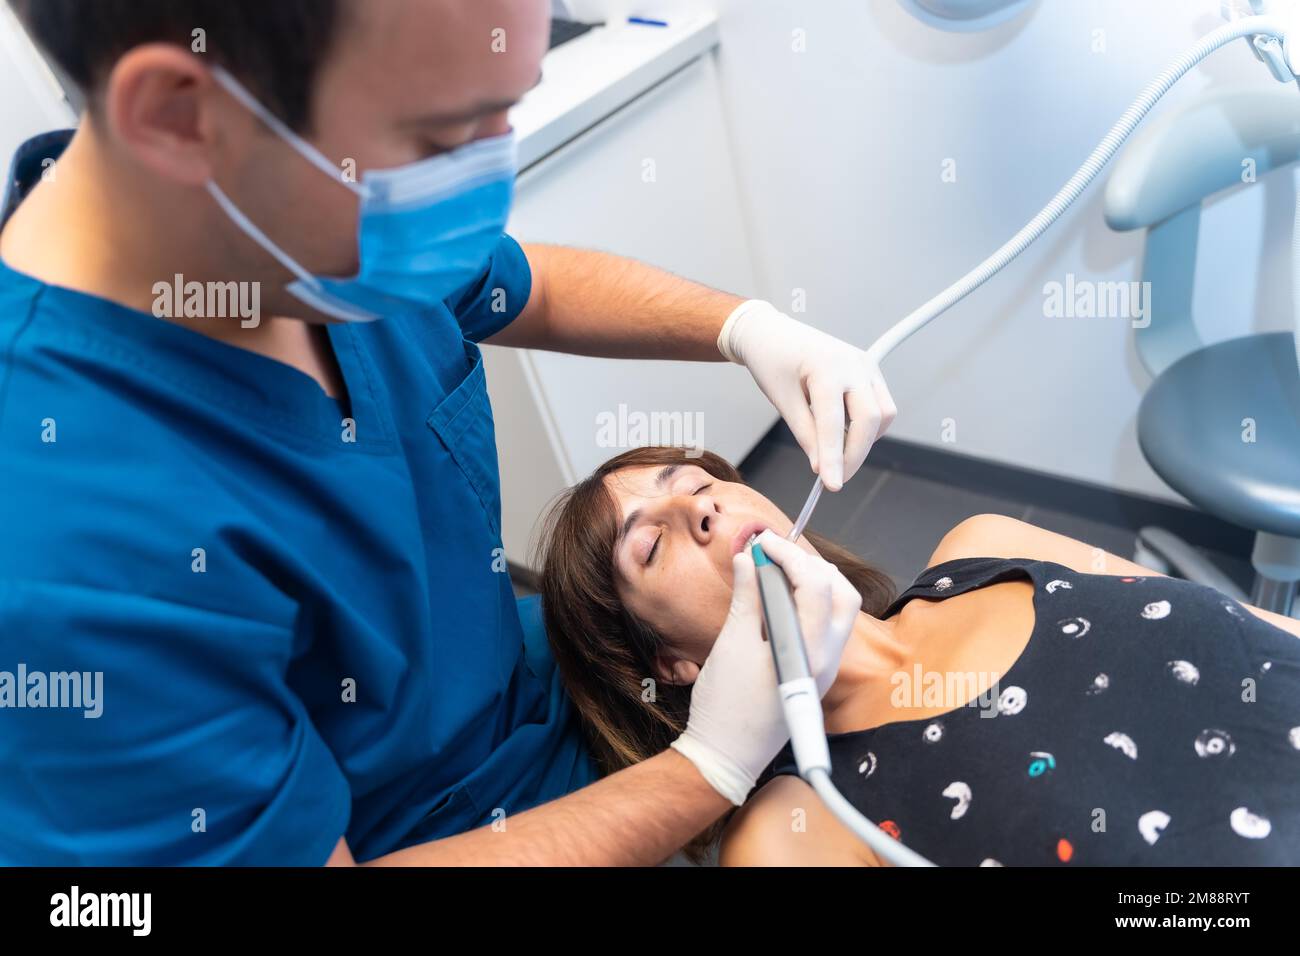 Dental clinic, dentist making a filling to the young patient Stock Photo